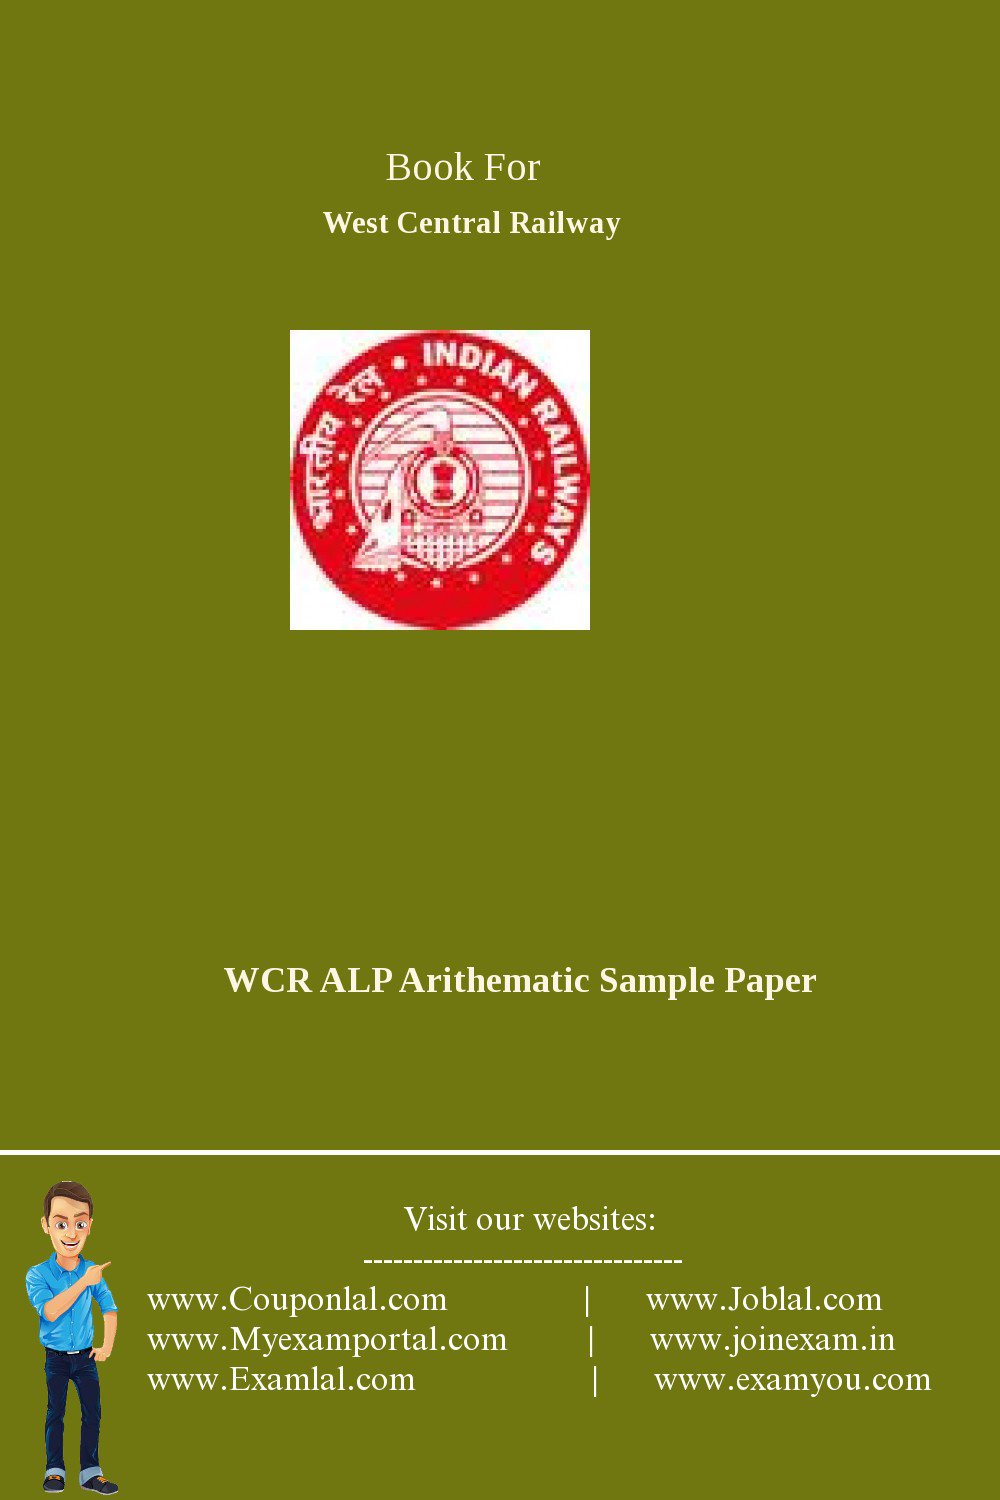 wcr-assistant-loco-pilot-arithematic-sample-paper-2017-pdf-download-for-main-exam-it-s-over-9000